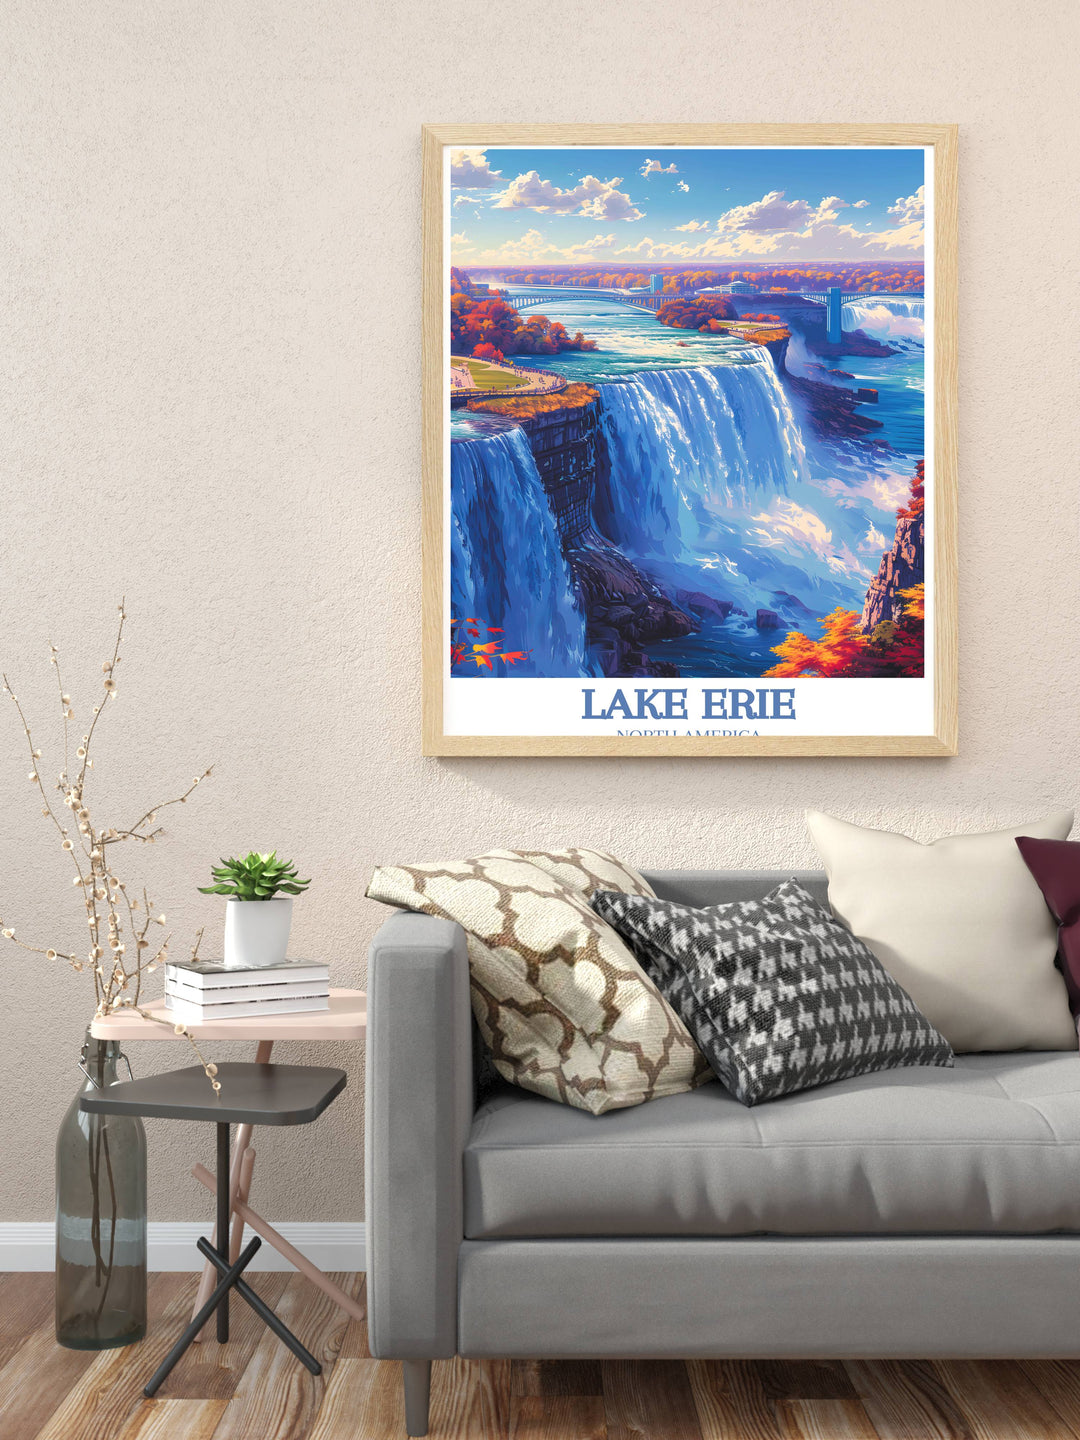 Lake Erie Wall Art - South America Posters - Lake Erie Art: Exclusive Collections